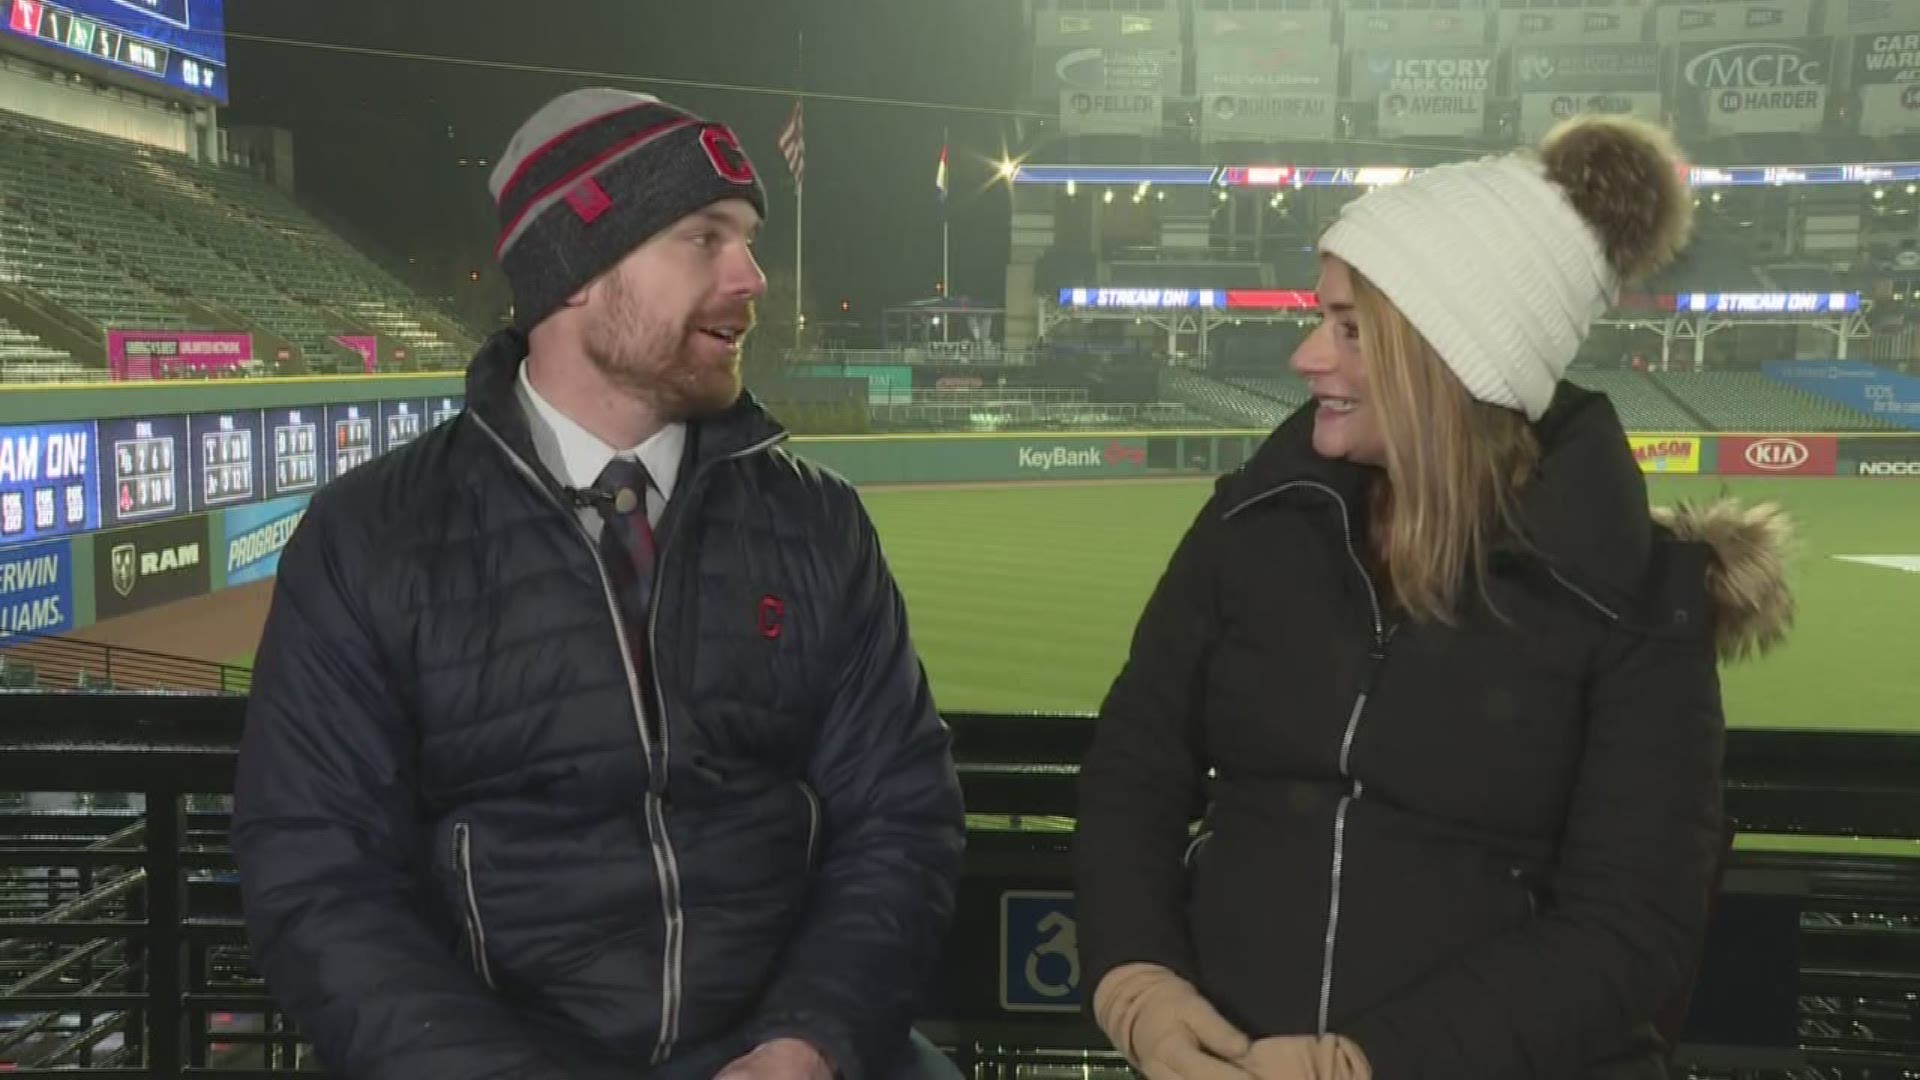 April 6, 2018: It's an unofficial holiday in Cleveland. Opening day has arrived! Jeremy Feador of the Cleveland Indians has a preview of what fans can expect during the home opener festivities.